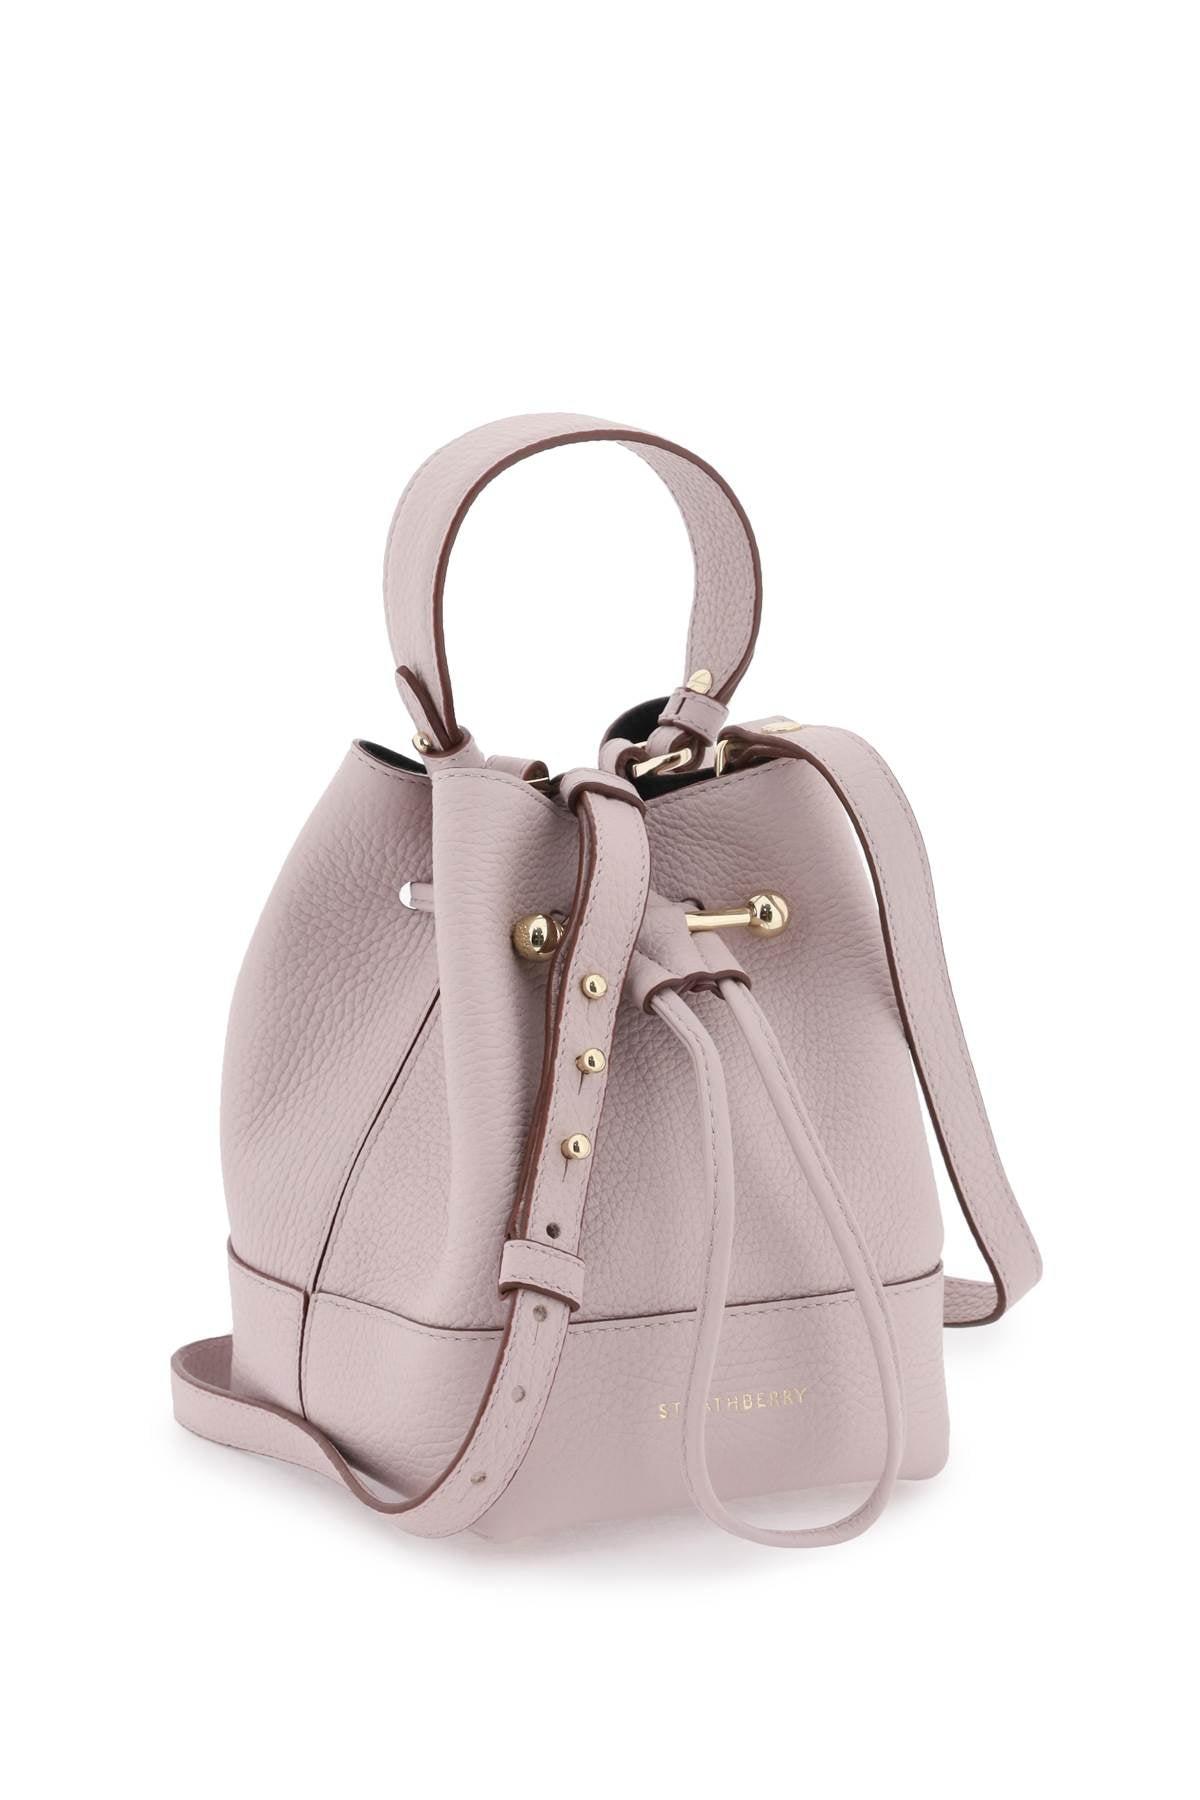 Strathberry 'lana Osette' Bucket Bag in Pink